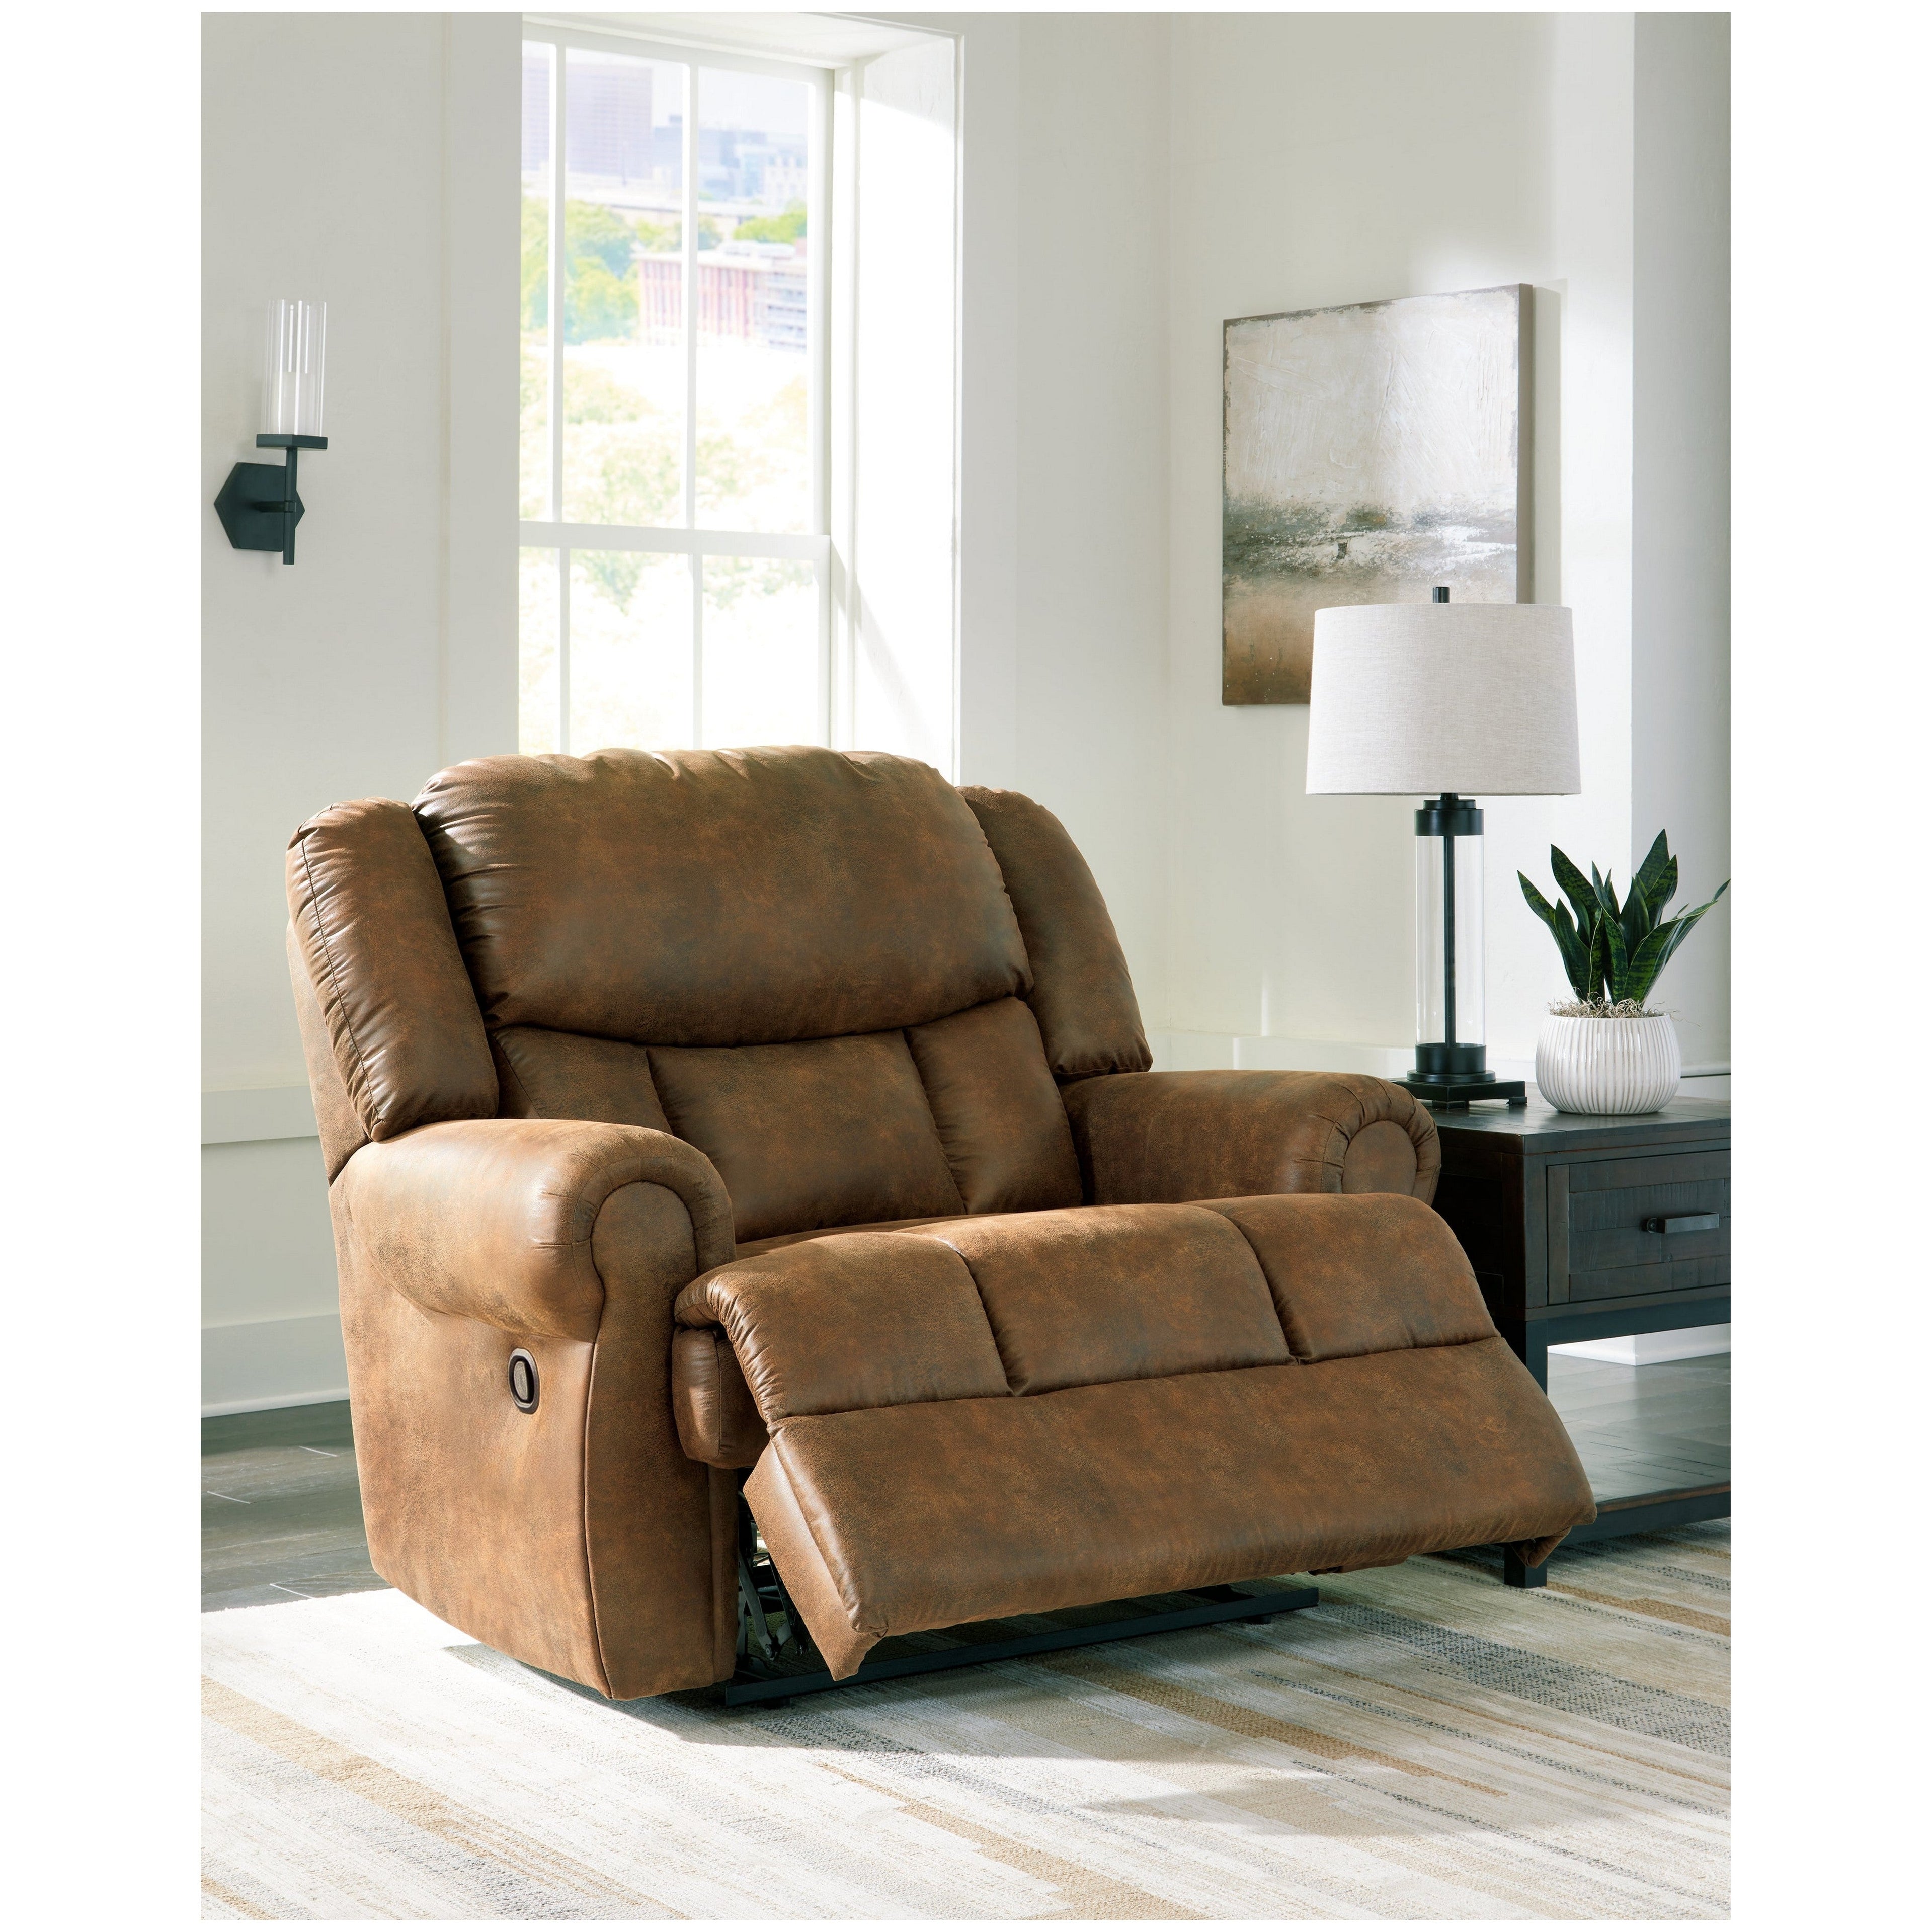 Boothbay Oversized Recliner Ash-4470452